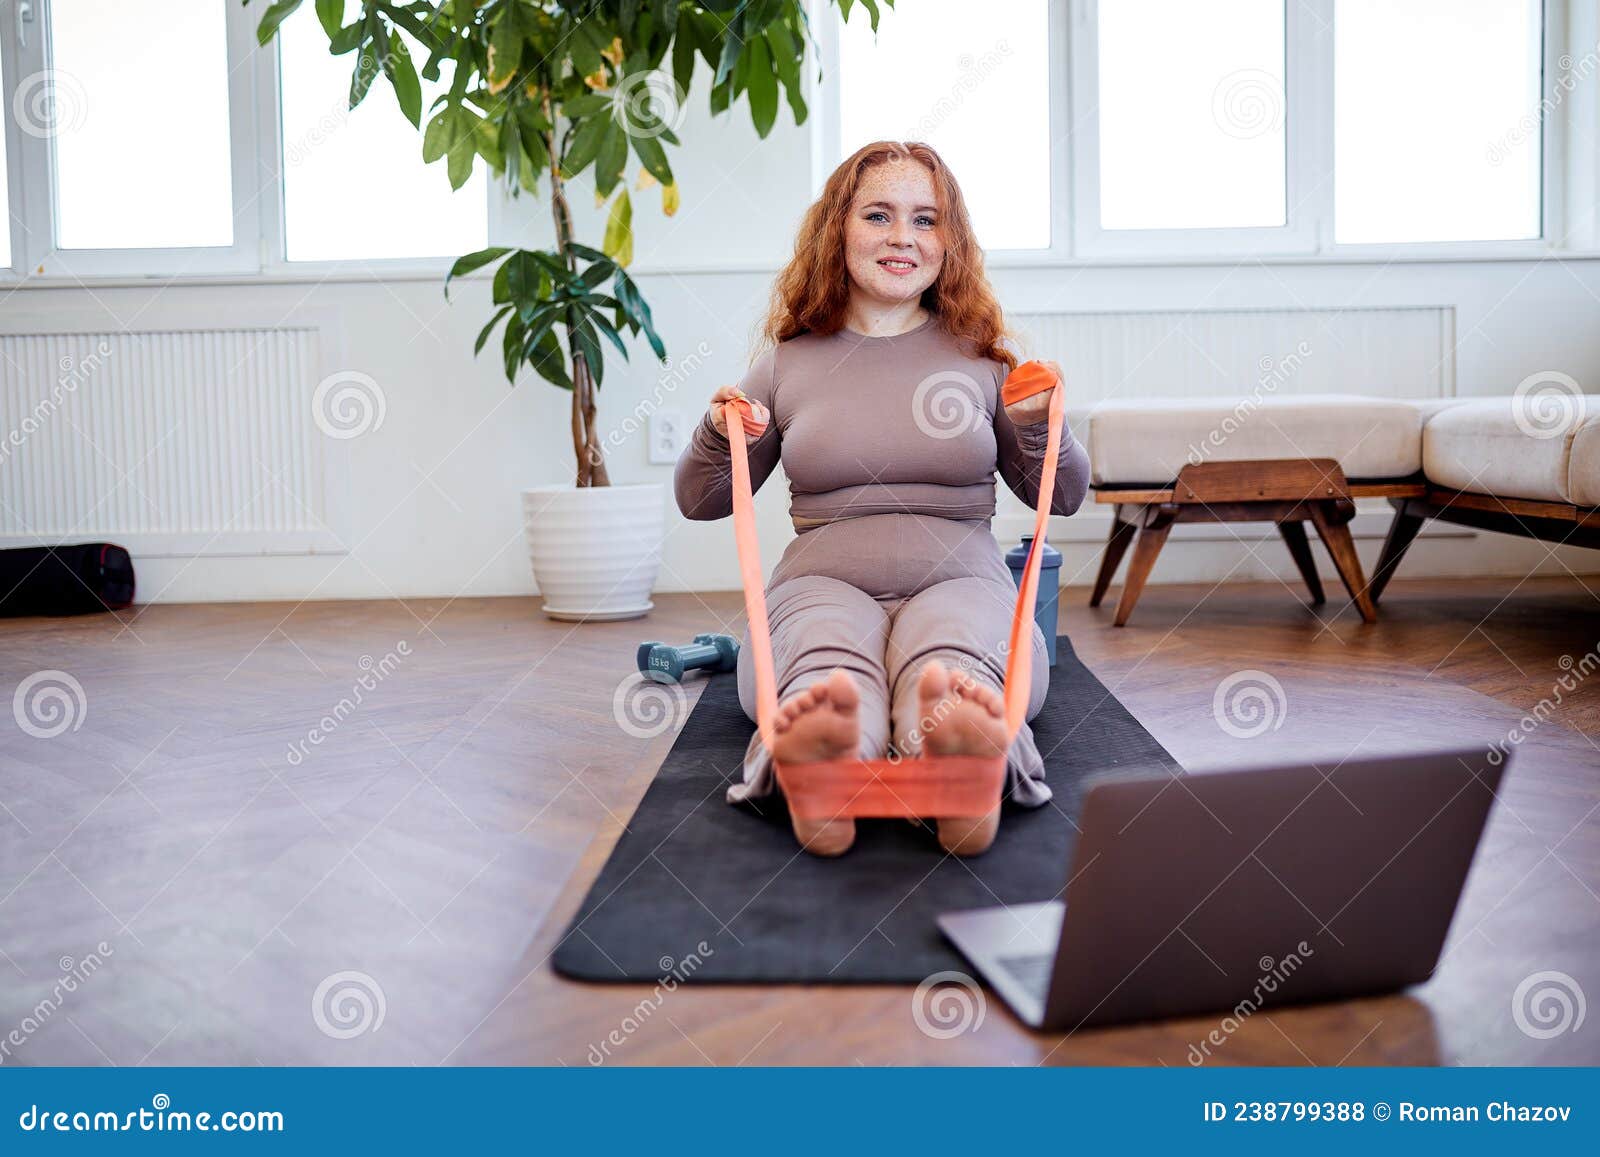 Overweight Redhead Female Doing Exercises For Legs Using Fitness Rubber